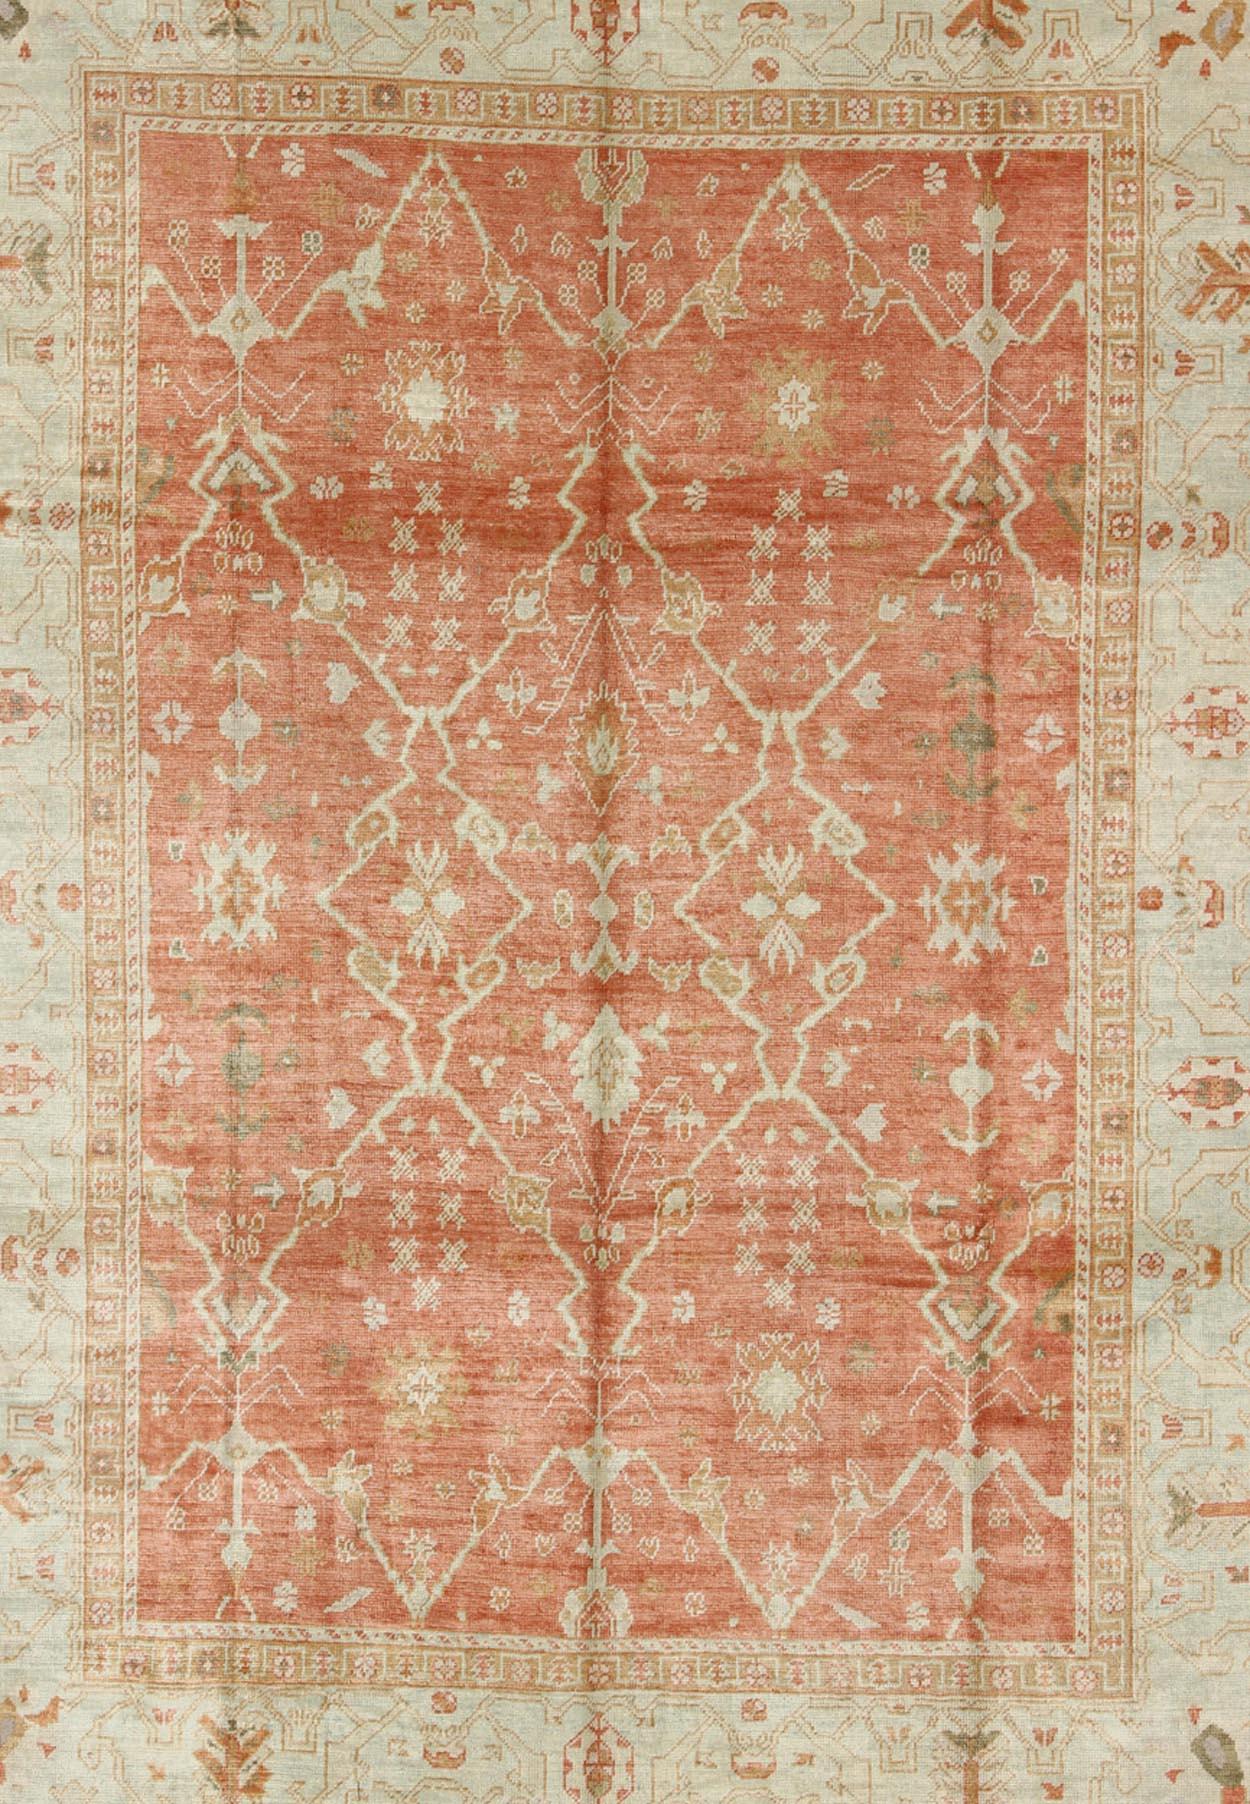 Hand-Knotted Turkish Oushak Rug with Angora Wool in Rust Orange, Green and Cream Tones For Sale